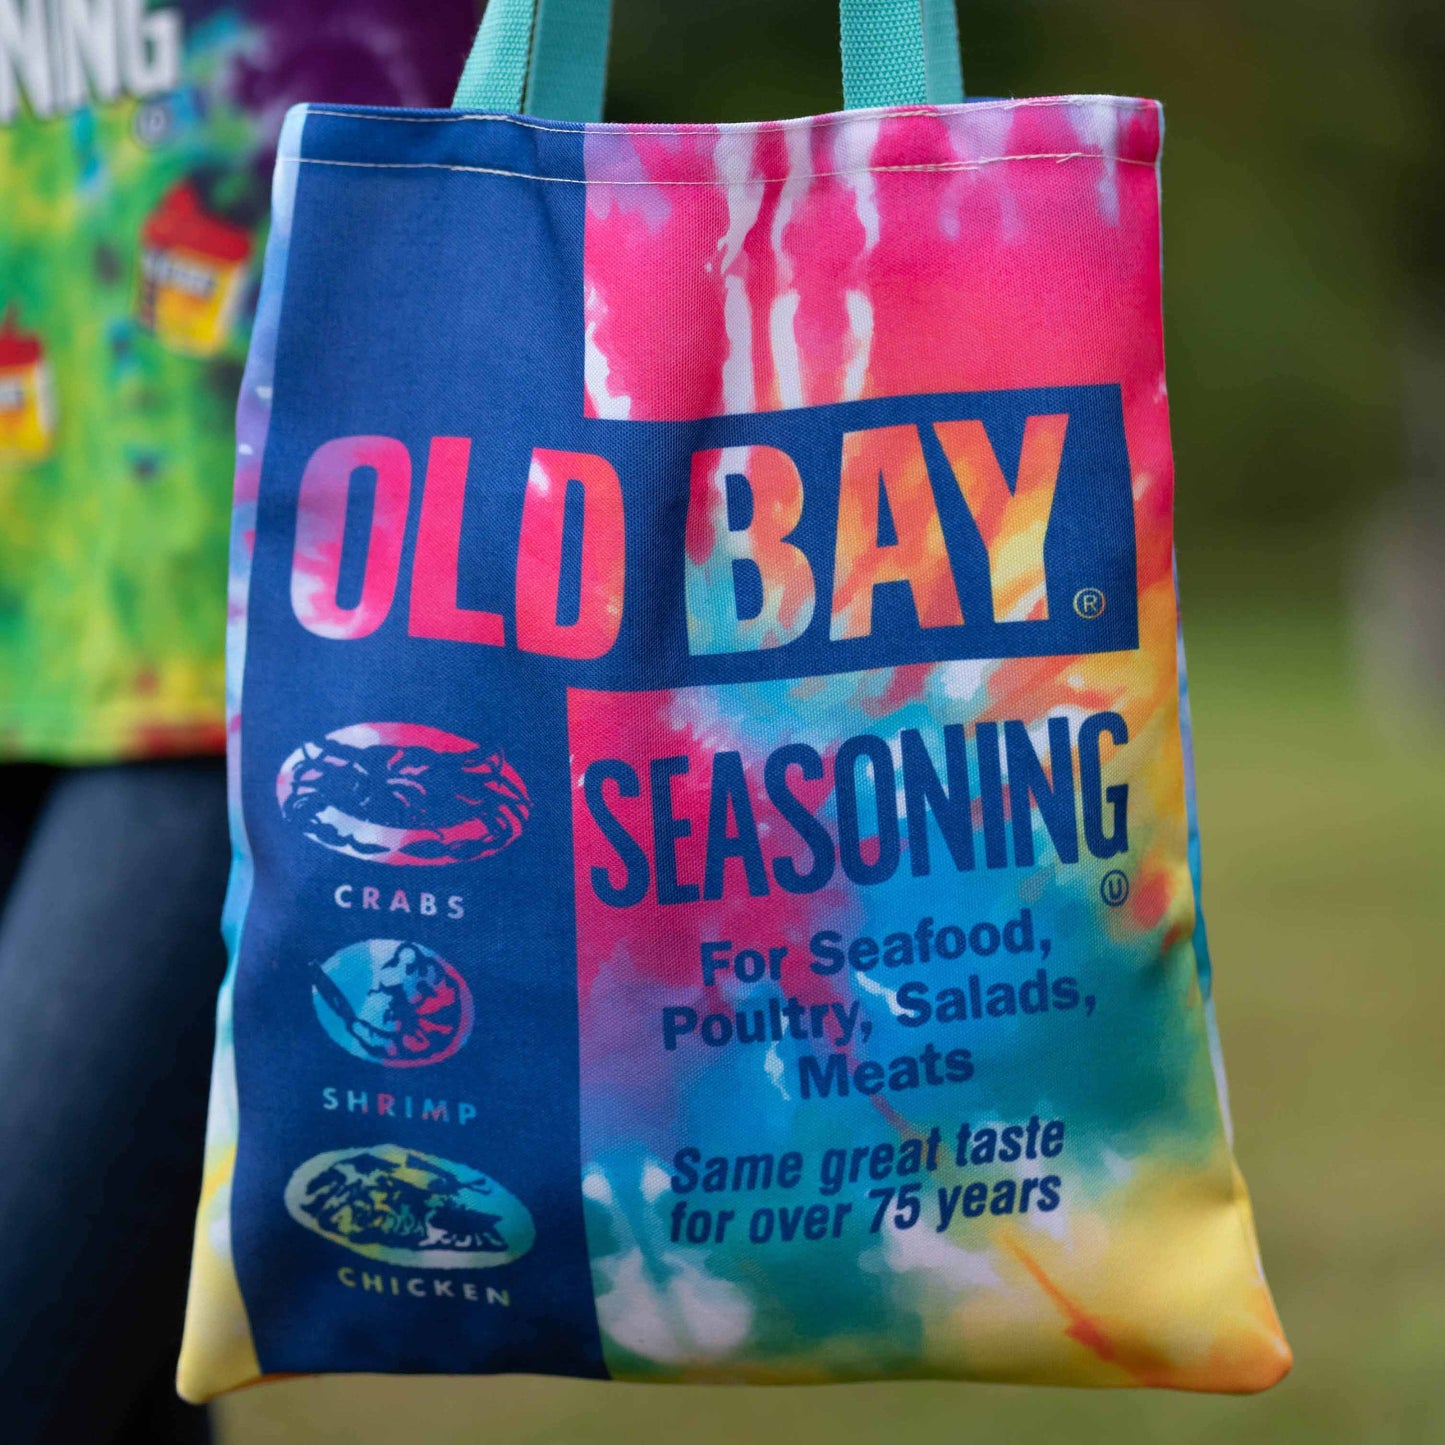 Old Bay Can (Tie Dye) / Tote Bag - Route One Apparel